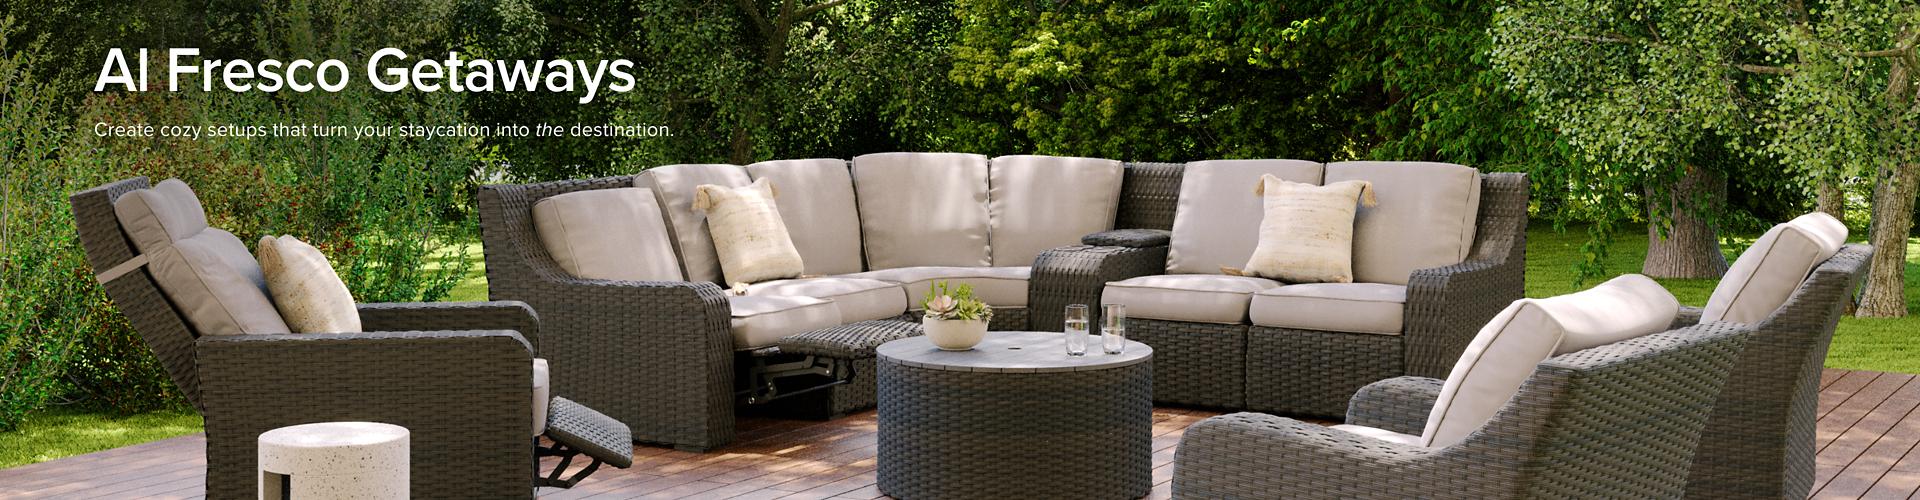 Outdoor Sectional Image